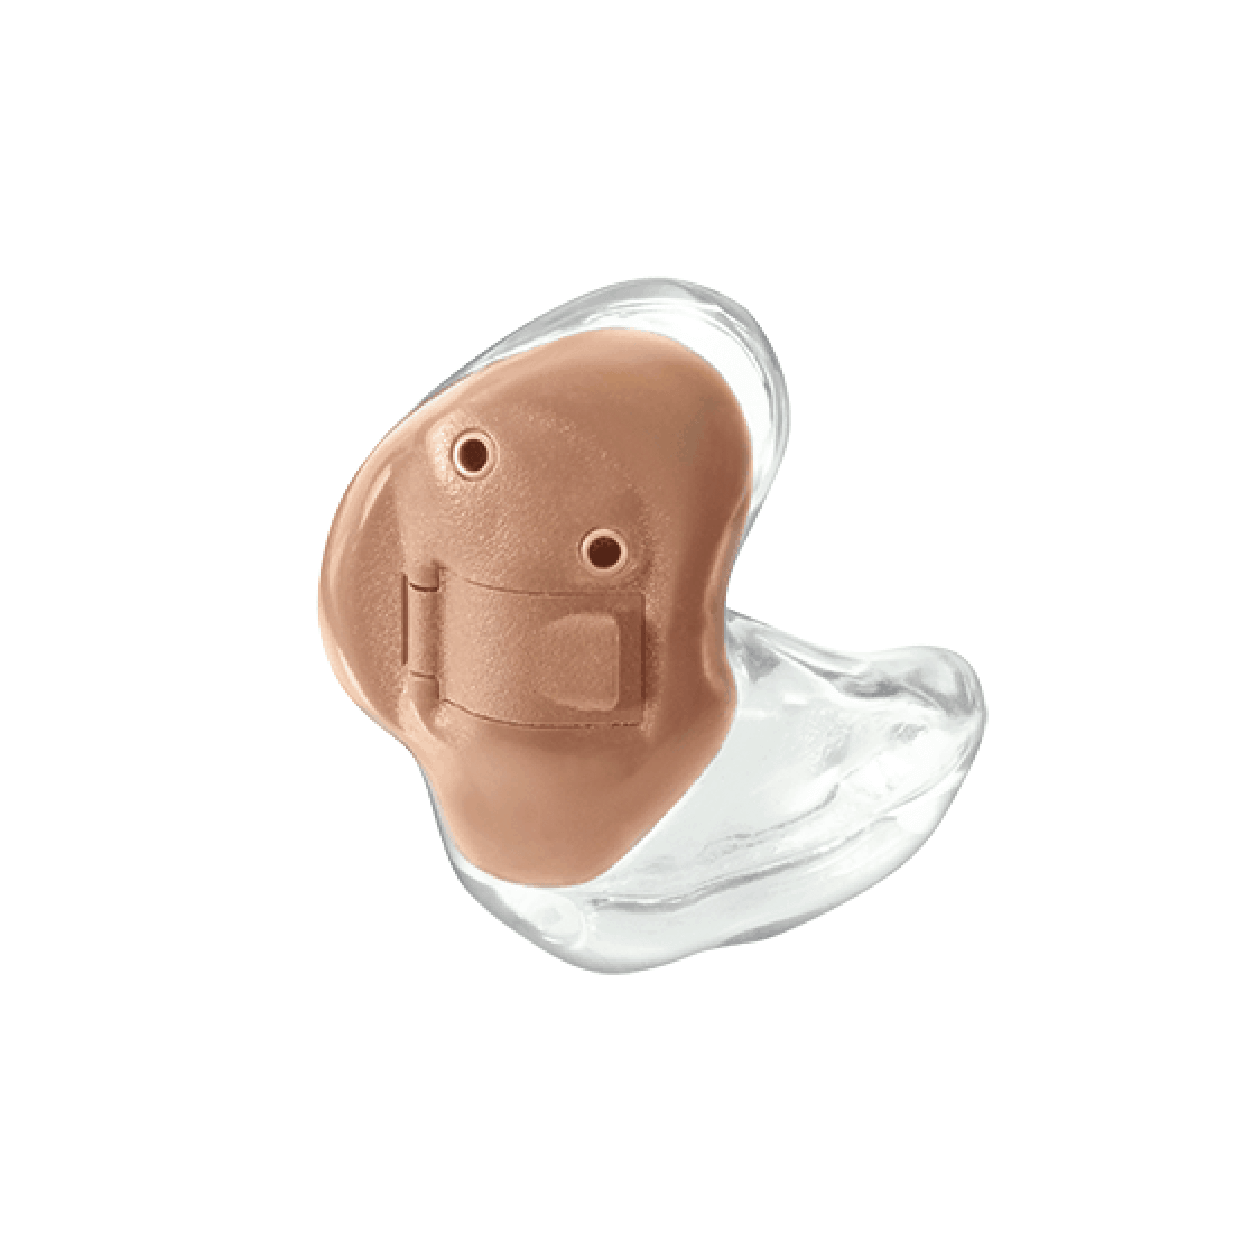 In the Ear hearing aids